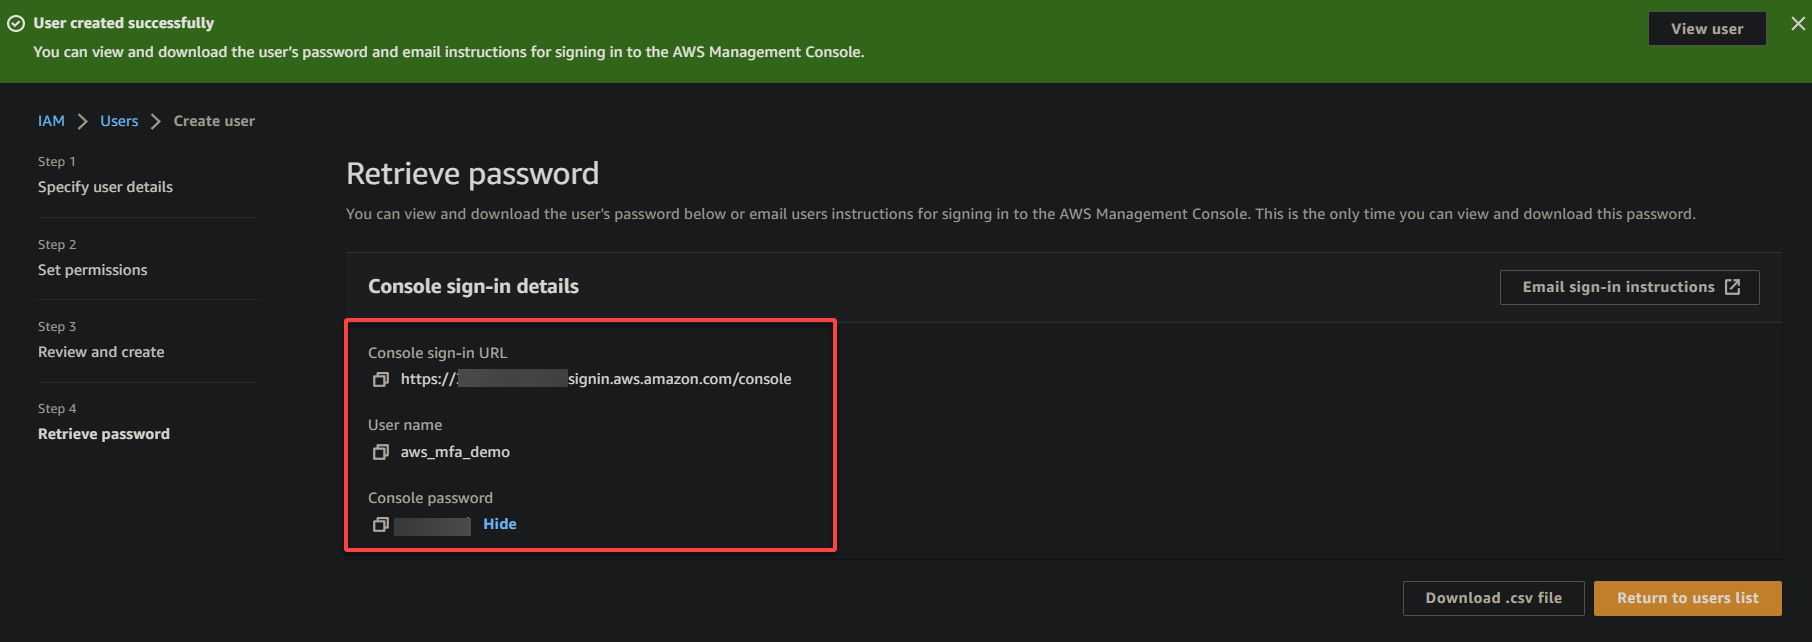 Accessing the IAM user’s console sign-in URL